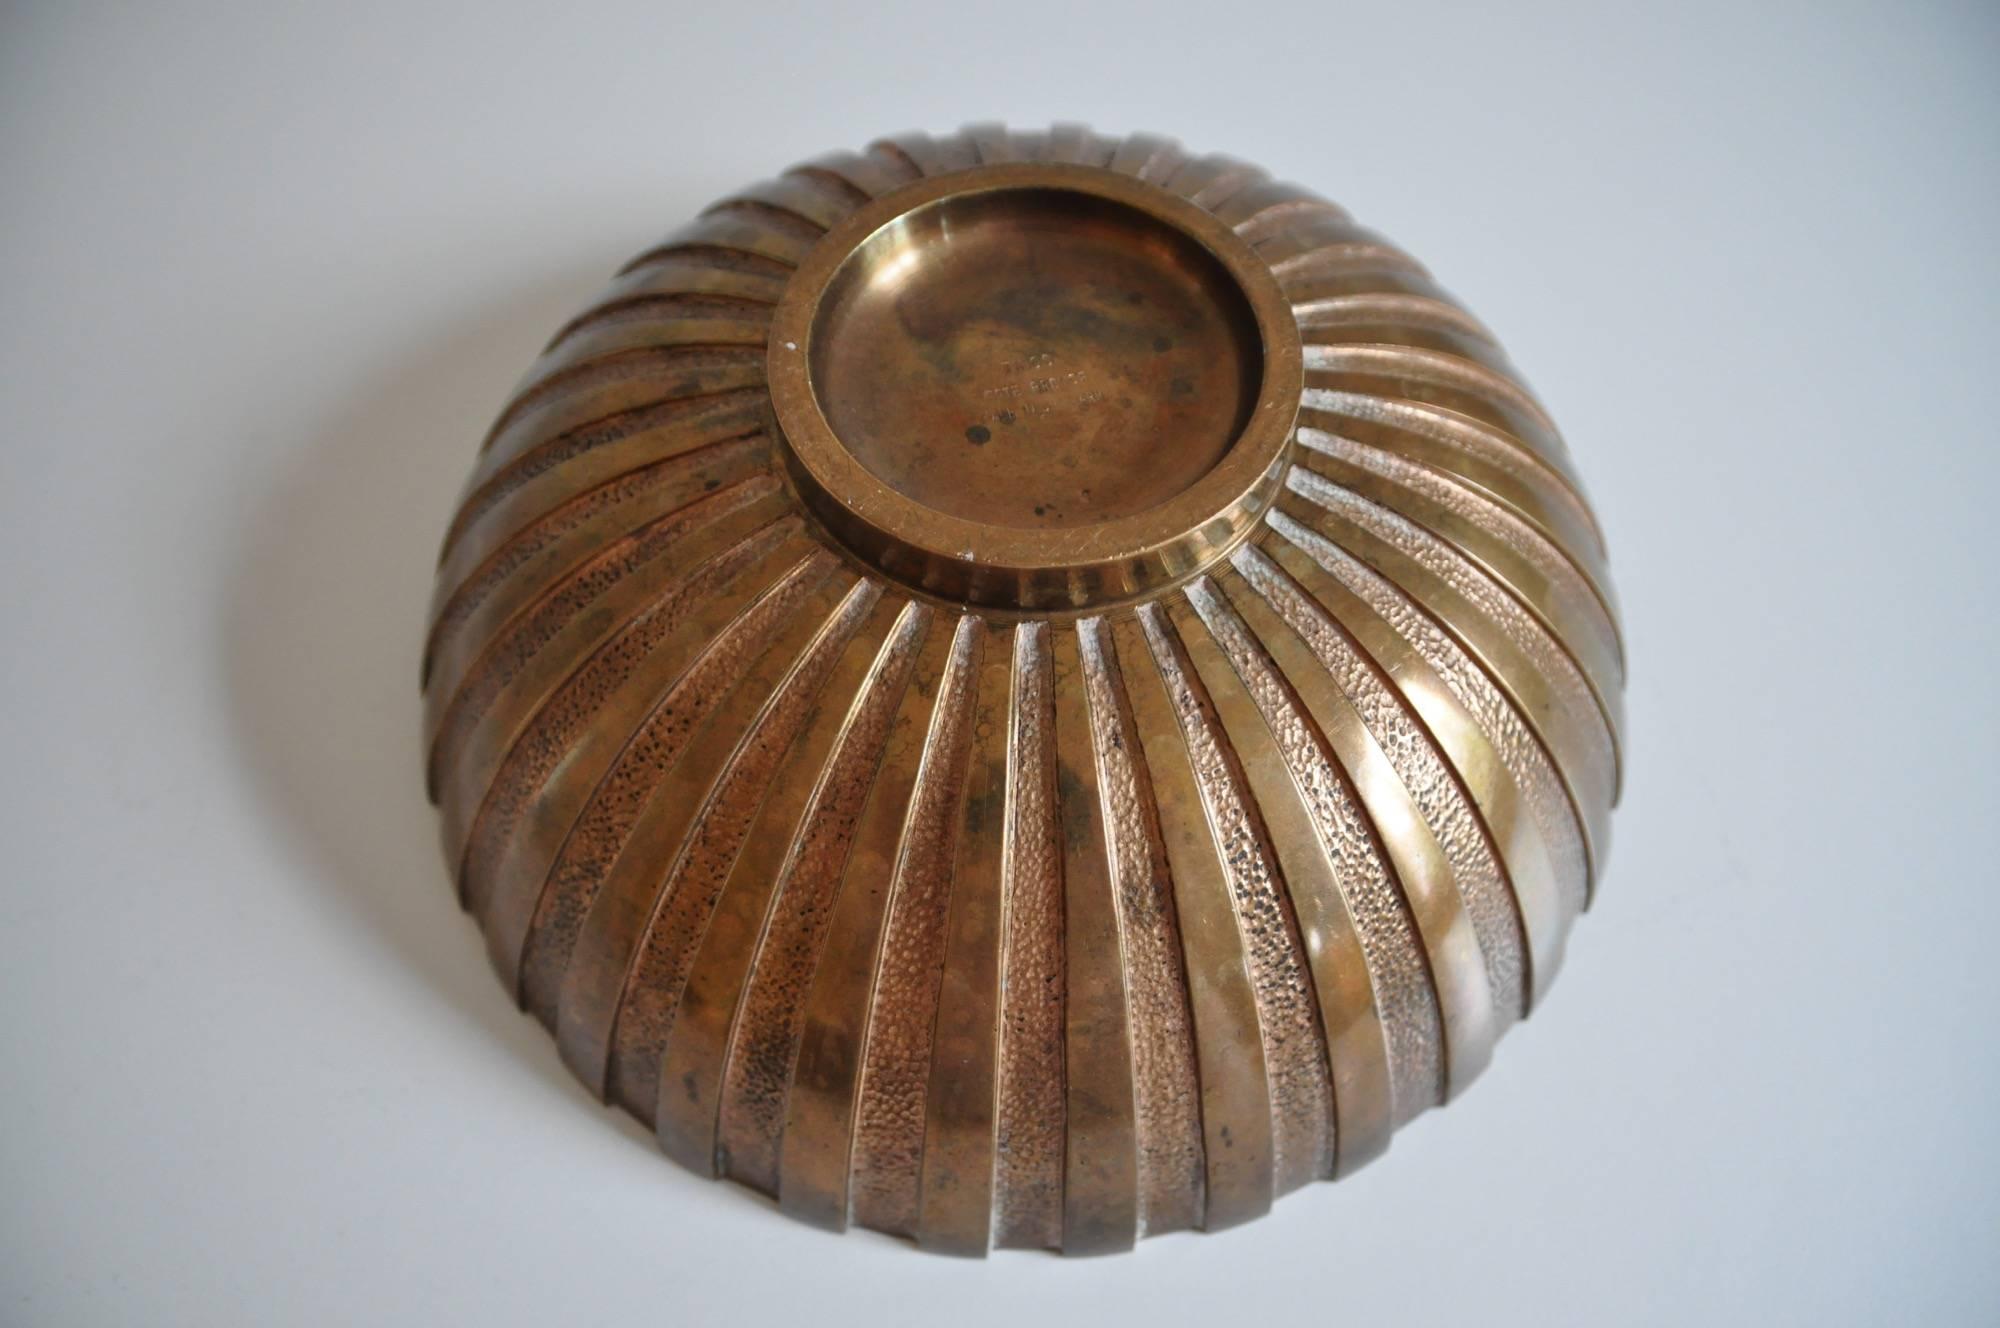 Nice large bronze bowl by Tinos Made in Denmark. Diameter 22cm with very nice patina.